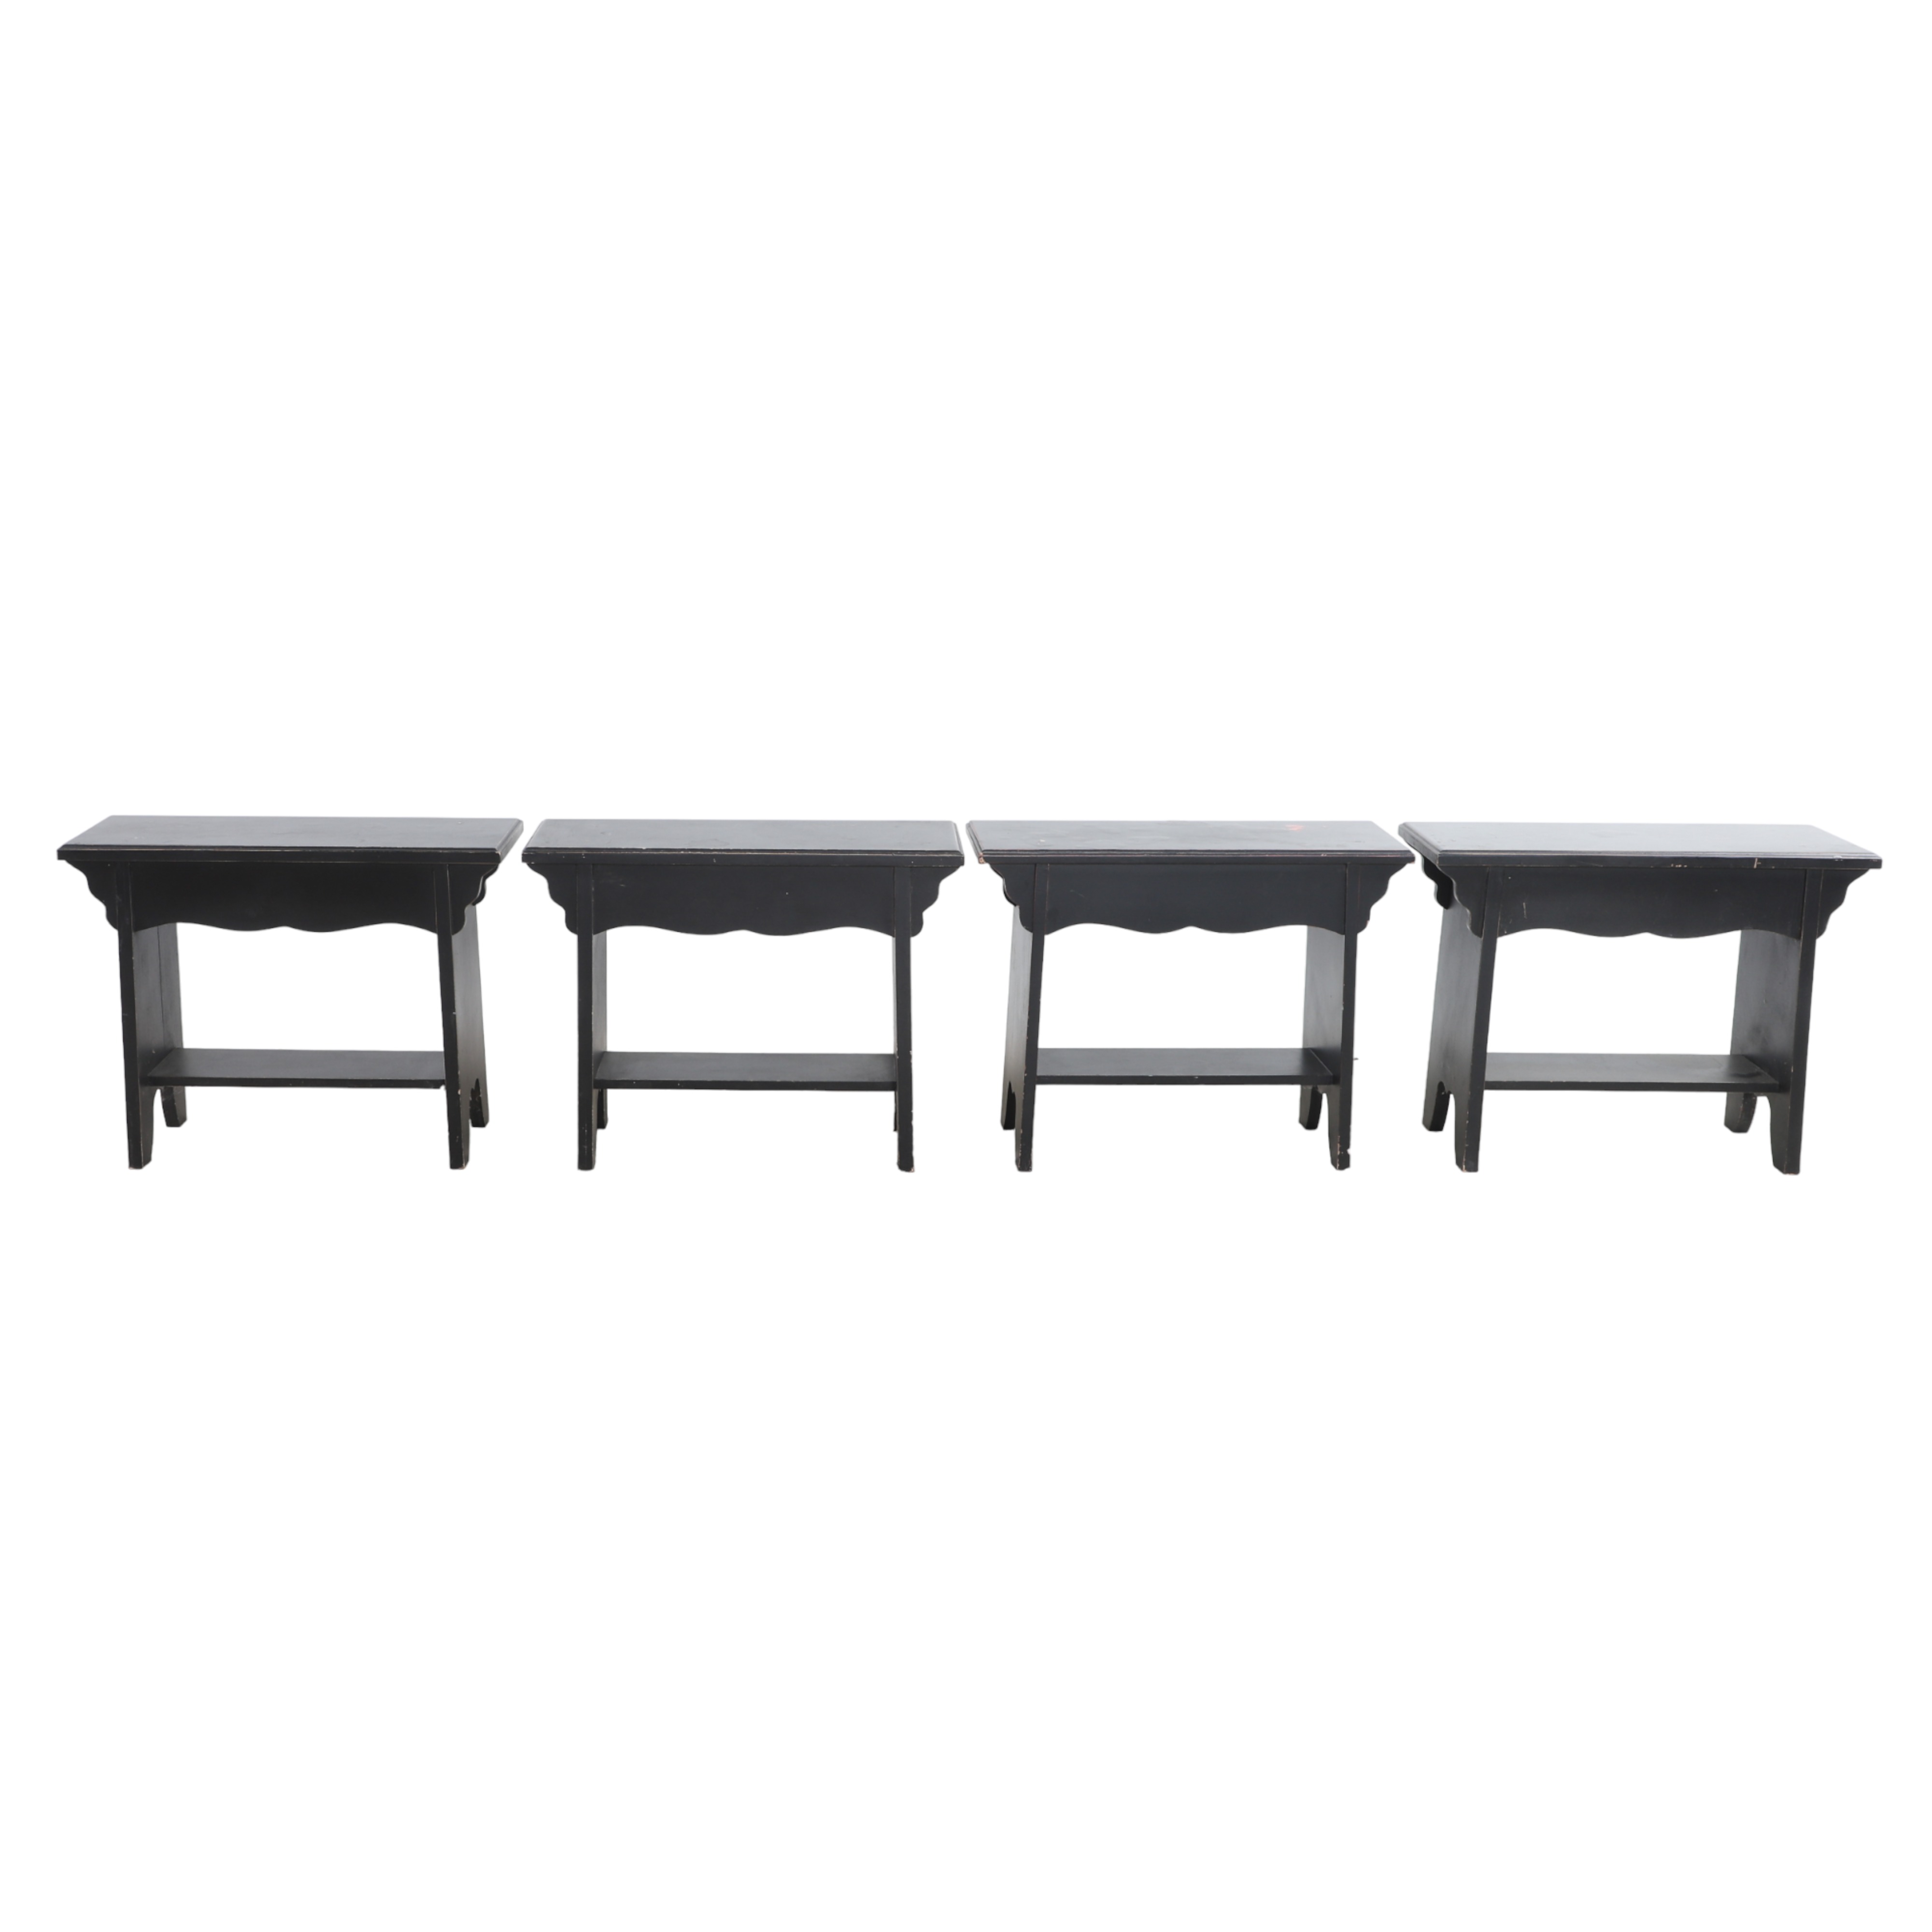 (4) Ebonized benches, cut out in